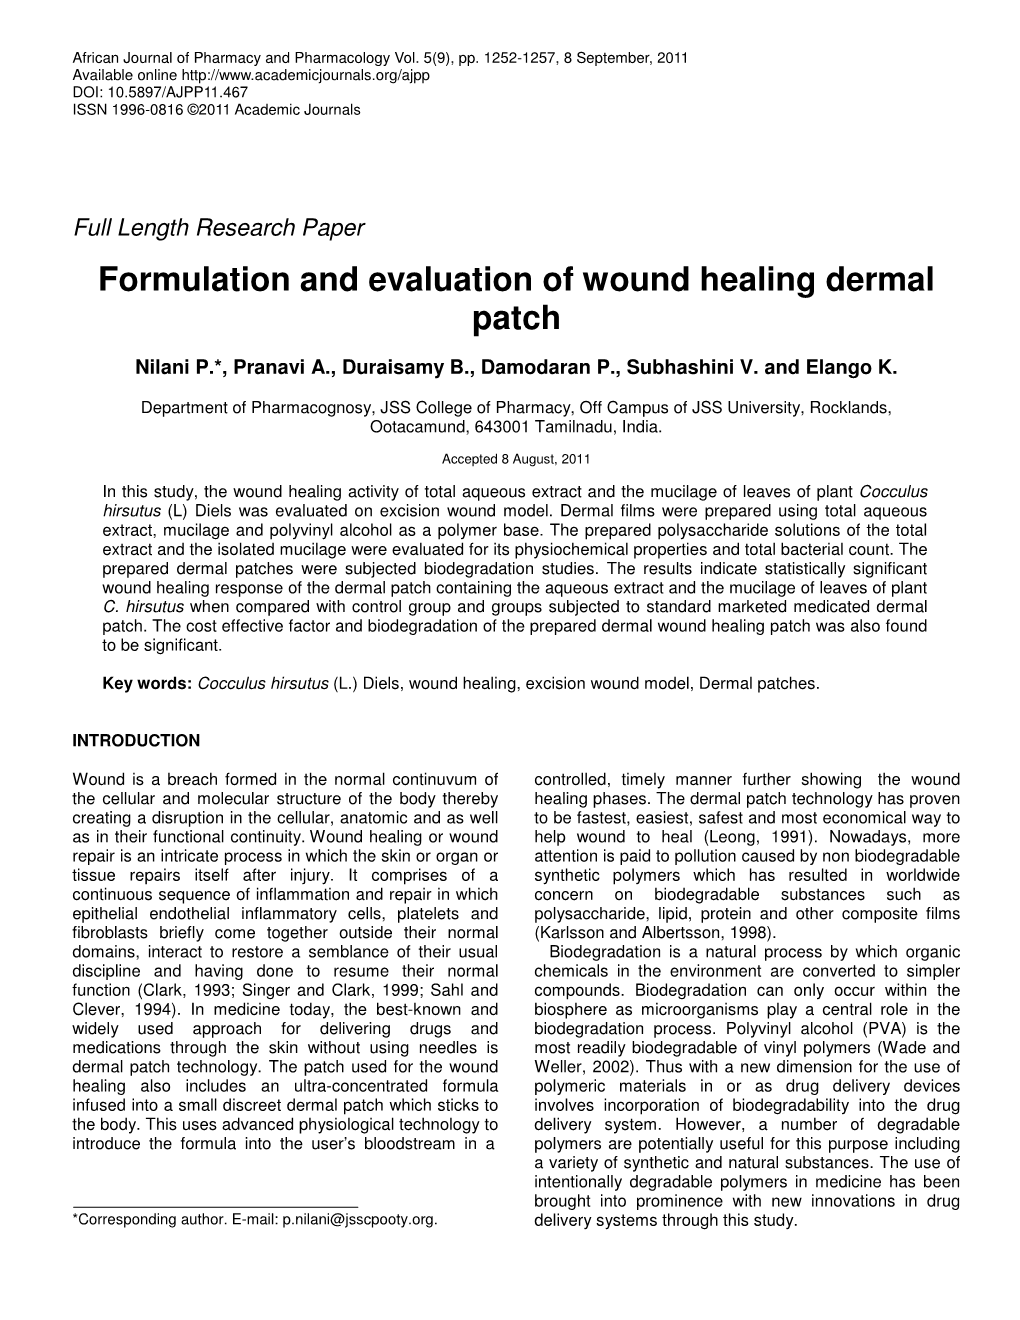 Formulation and Evaluation of Wound Healing Dermal Patch